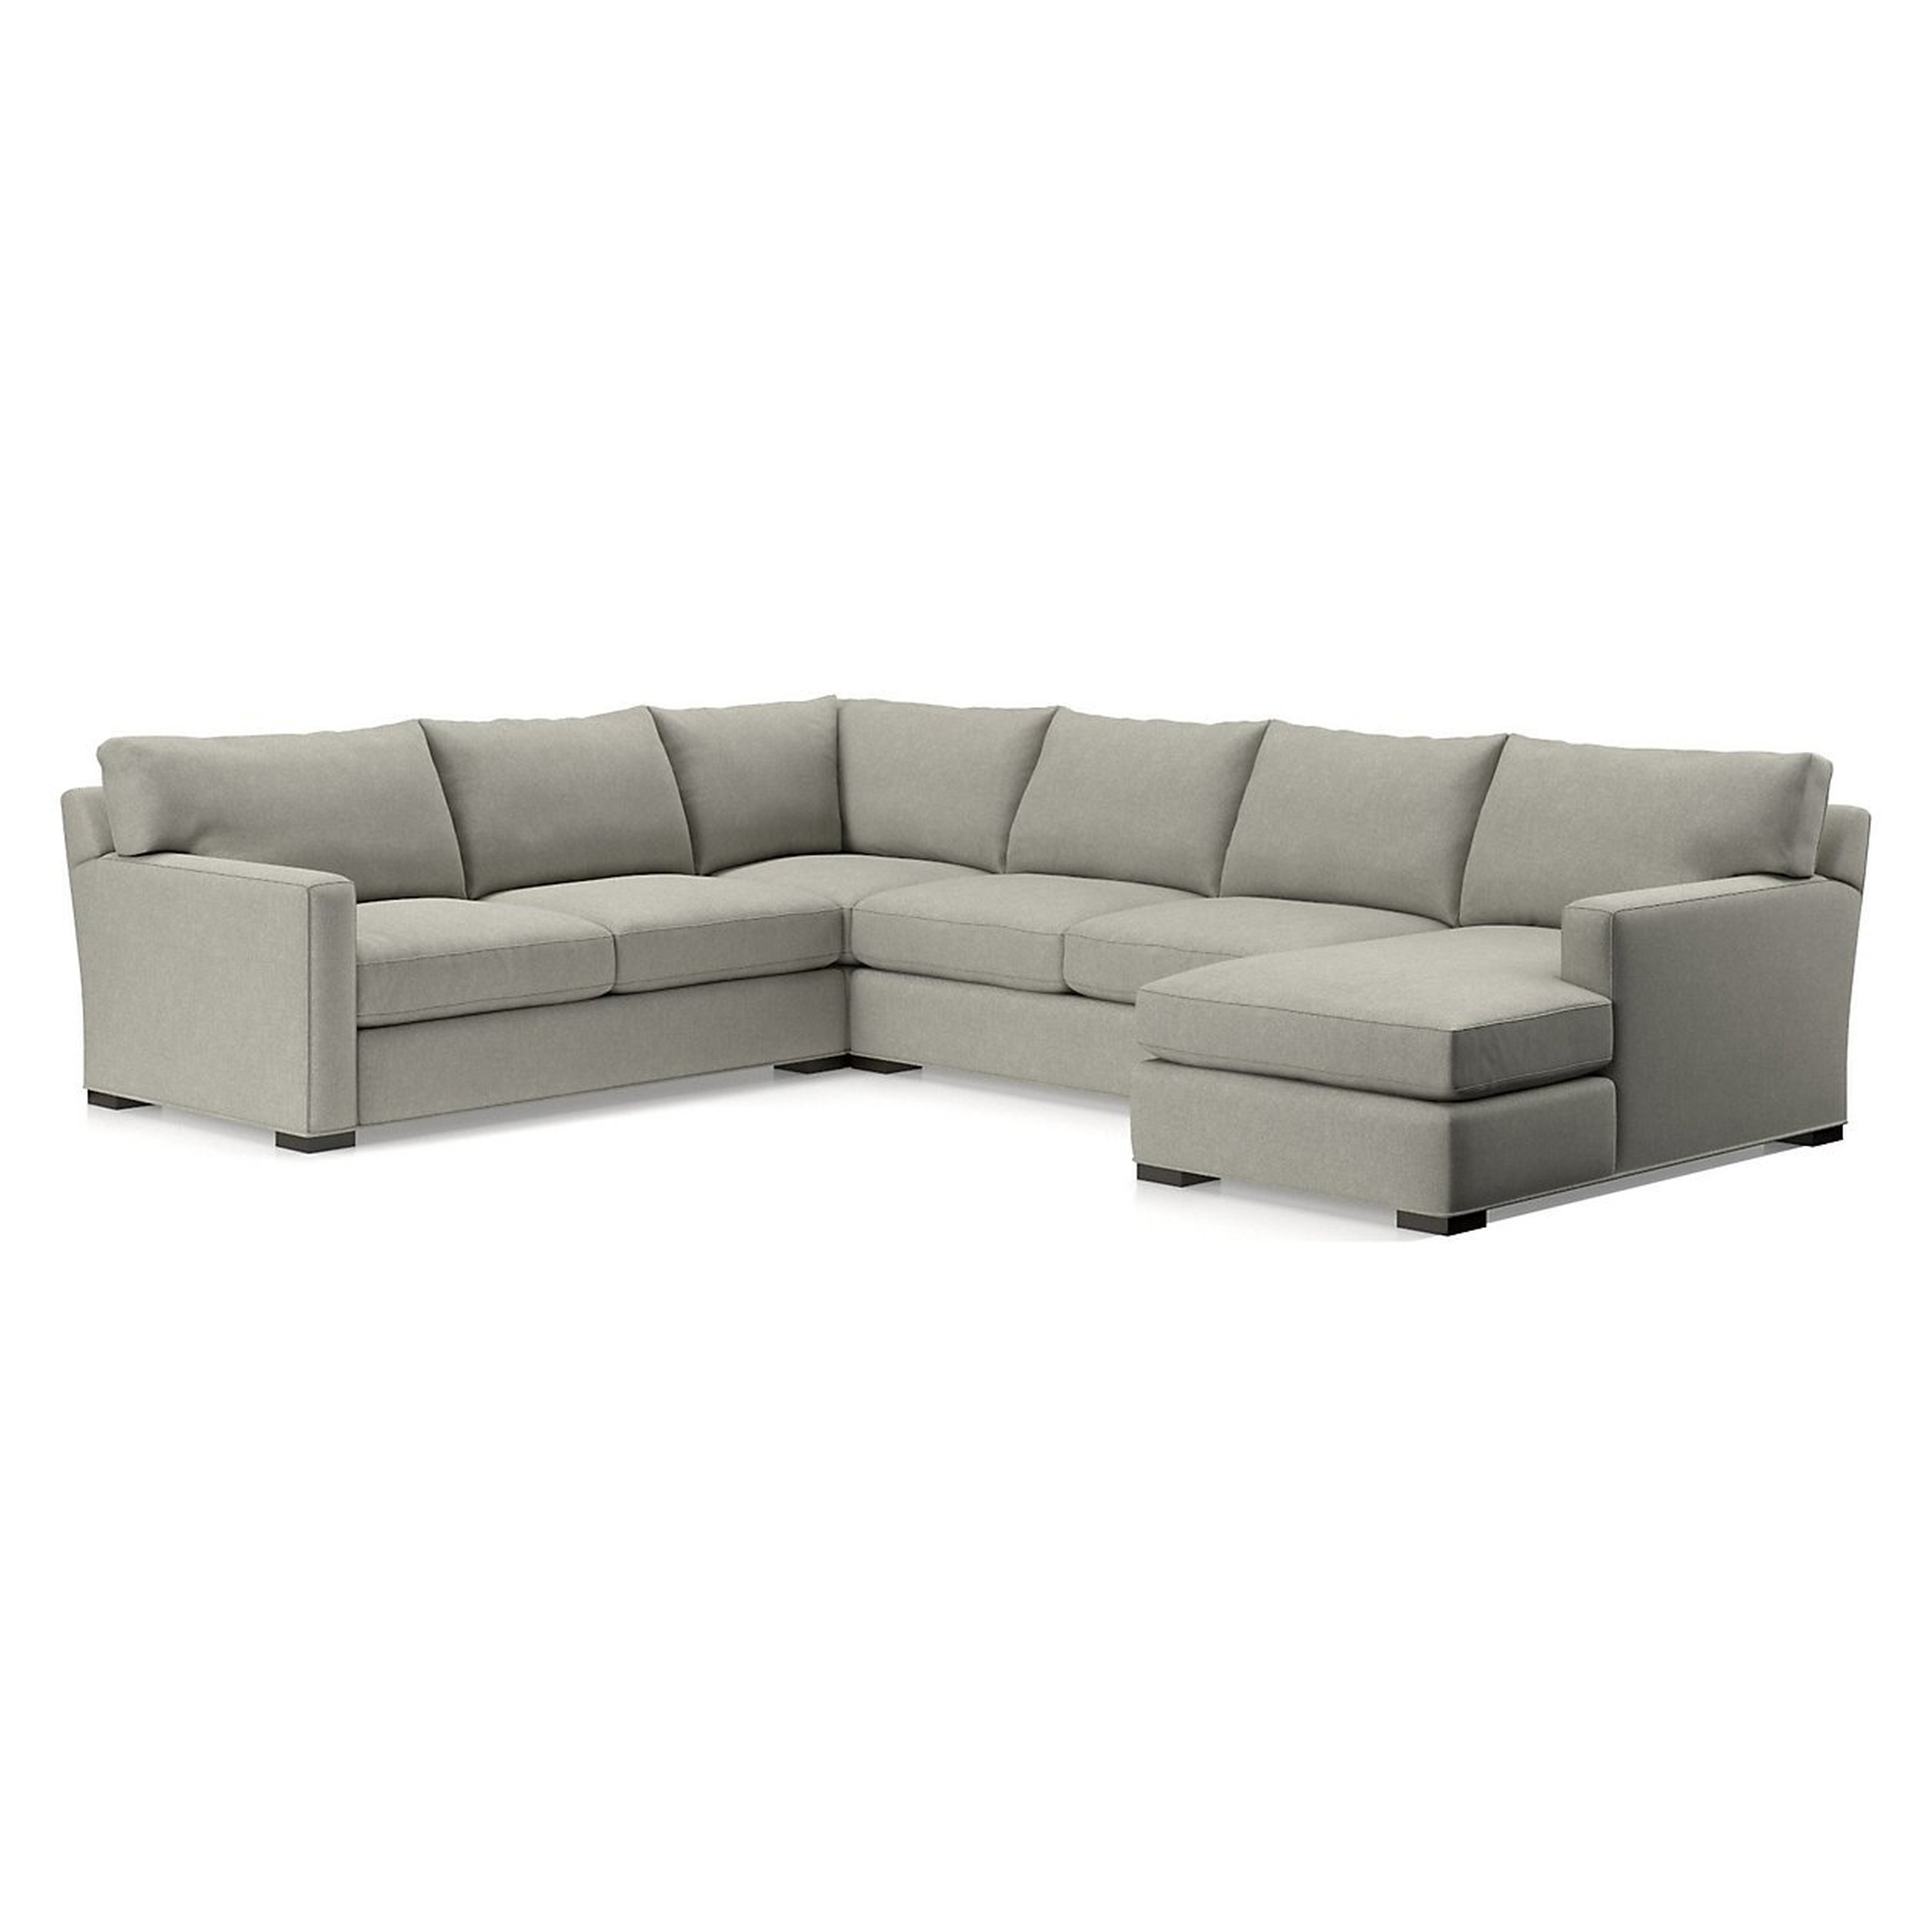 Axis 4-Piece Sectional Sofa - Douglas Ice - Crate and Barrel